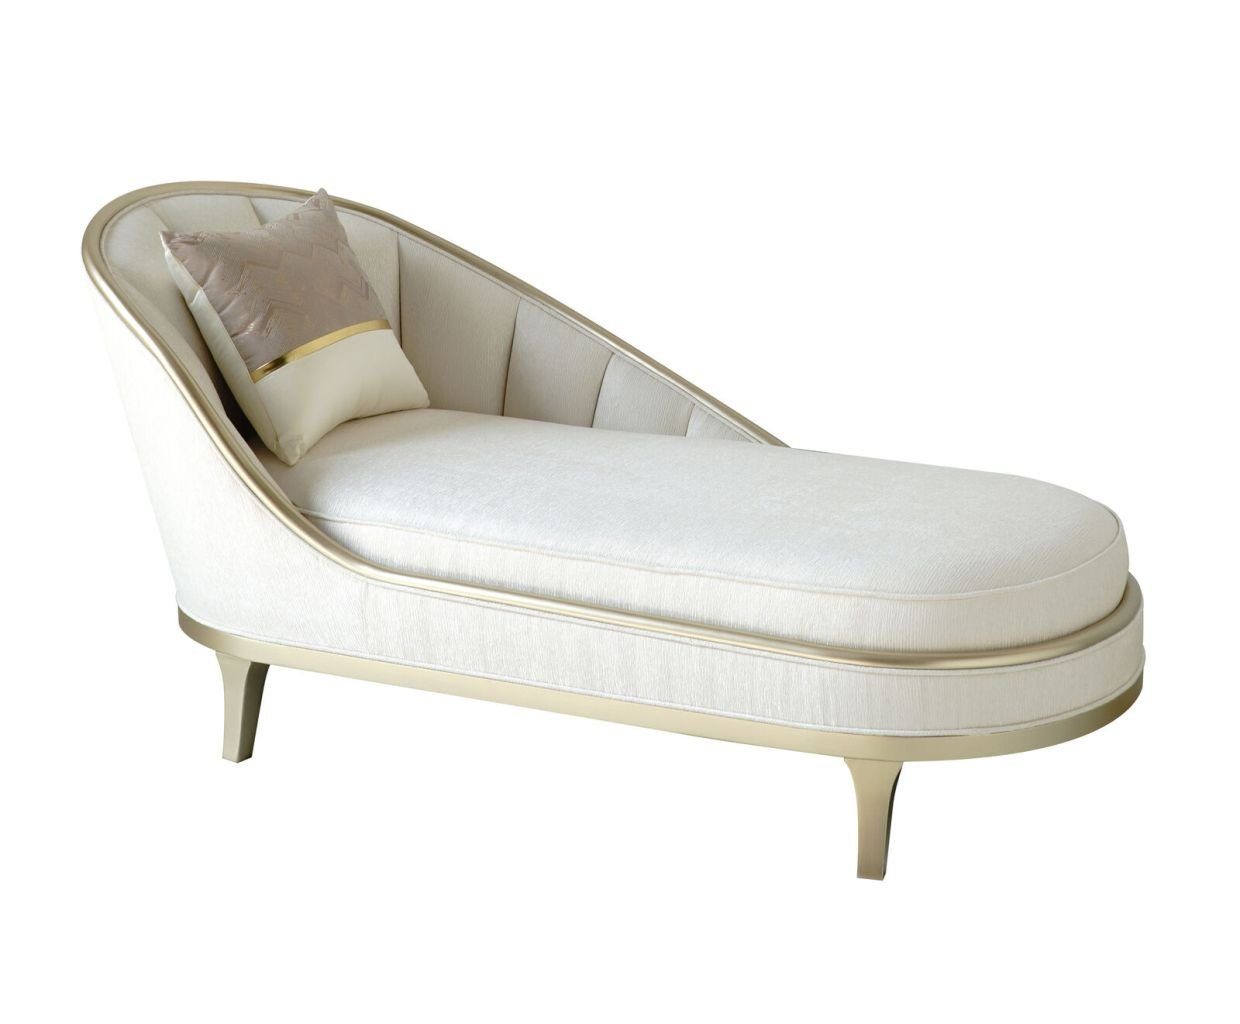 Moderner Chaiselongue Luxus Made Chaiselounge Liege Europe Couch, in Wohnzimmer JVmoebel Chaise